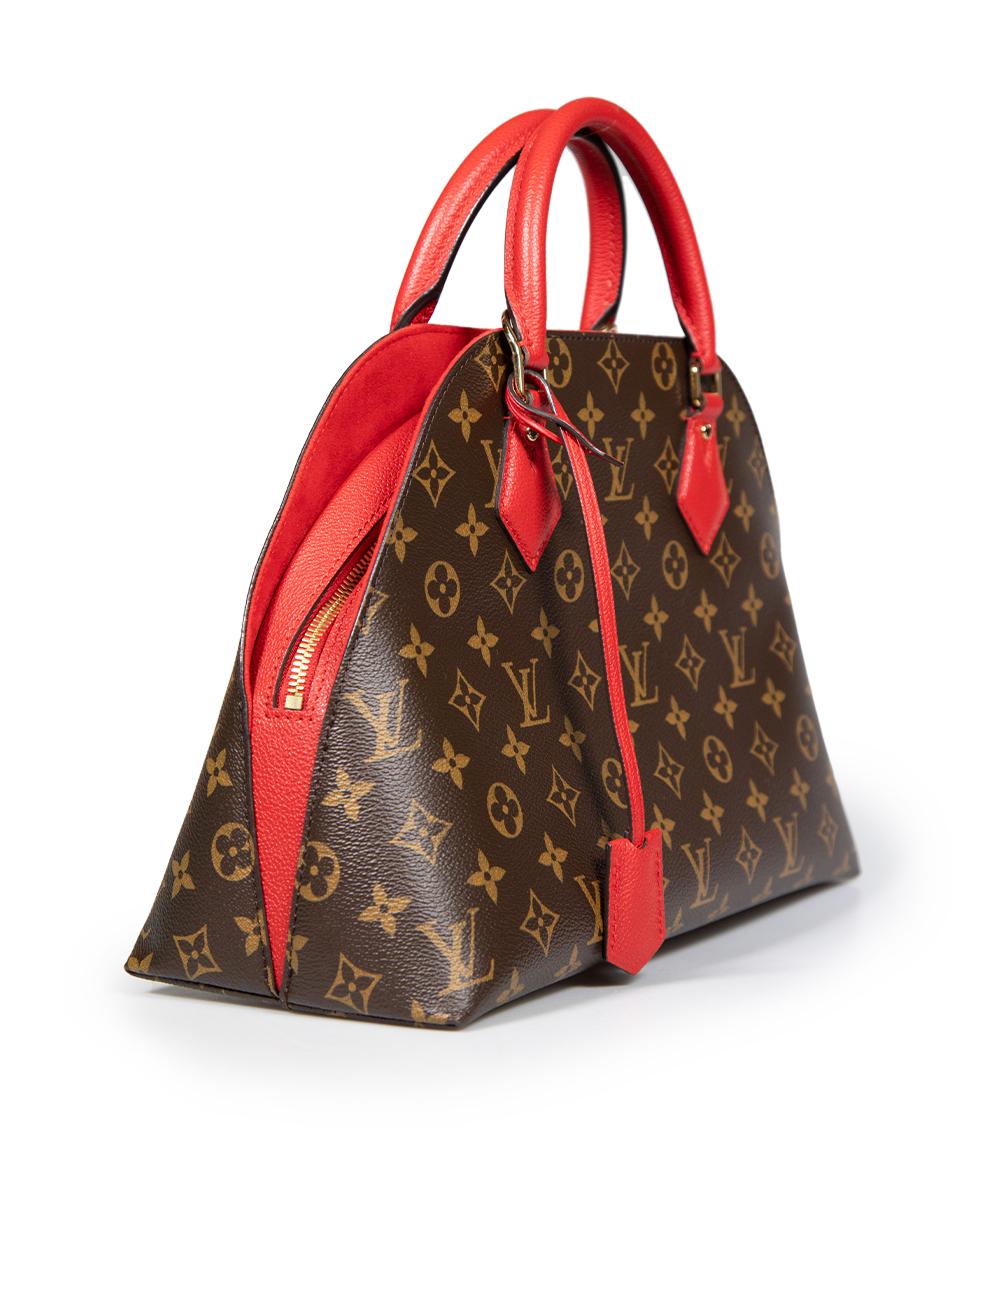 CONDITION is Very good. Minimal wear to the bag is evident. Minimal wear to the front right bottom and bottom edges is seen with scratches on this used Louis Vuitton designer resale item. This item comes with an original dust bag.
 
 
 
 Details
 
